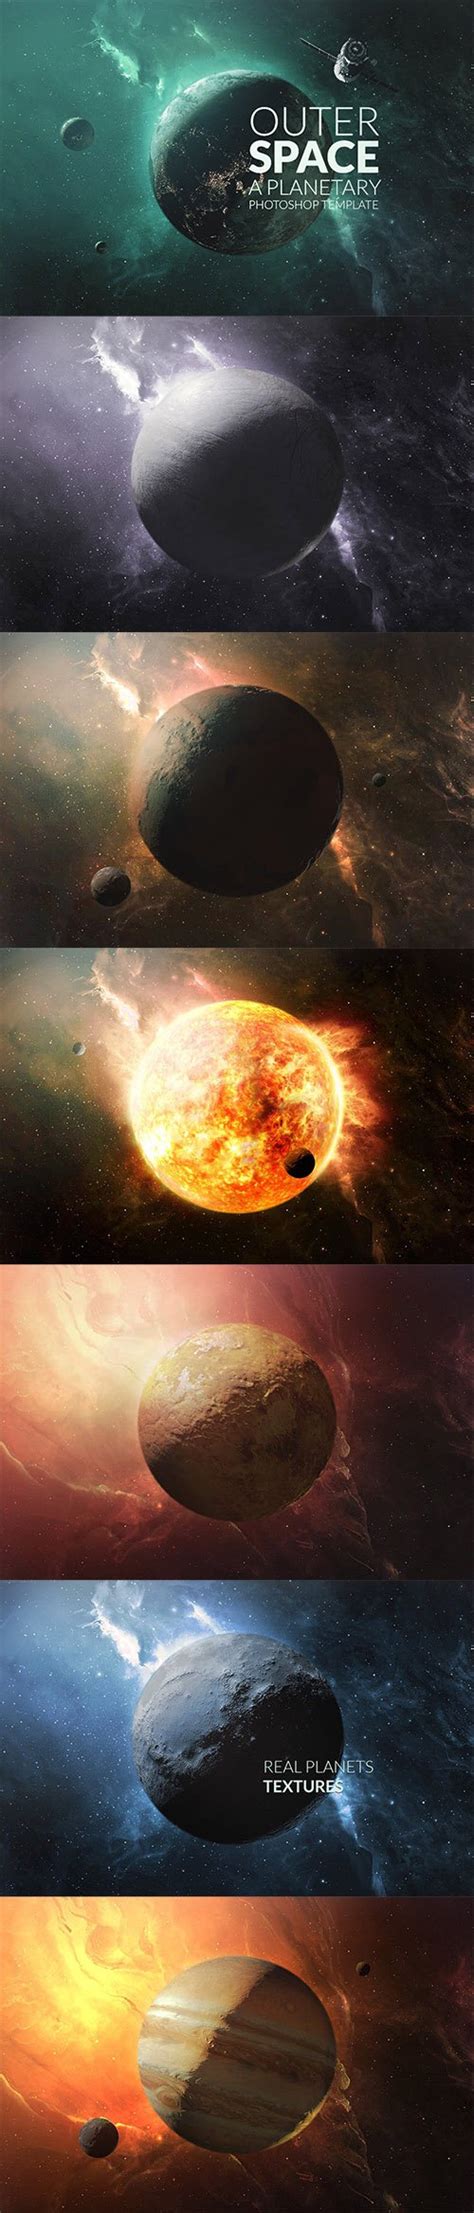 outer space planetary template psd nitrogfx  unique